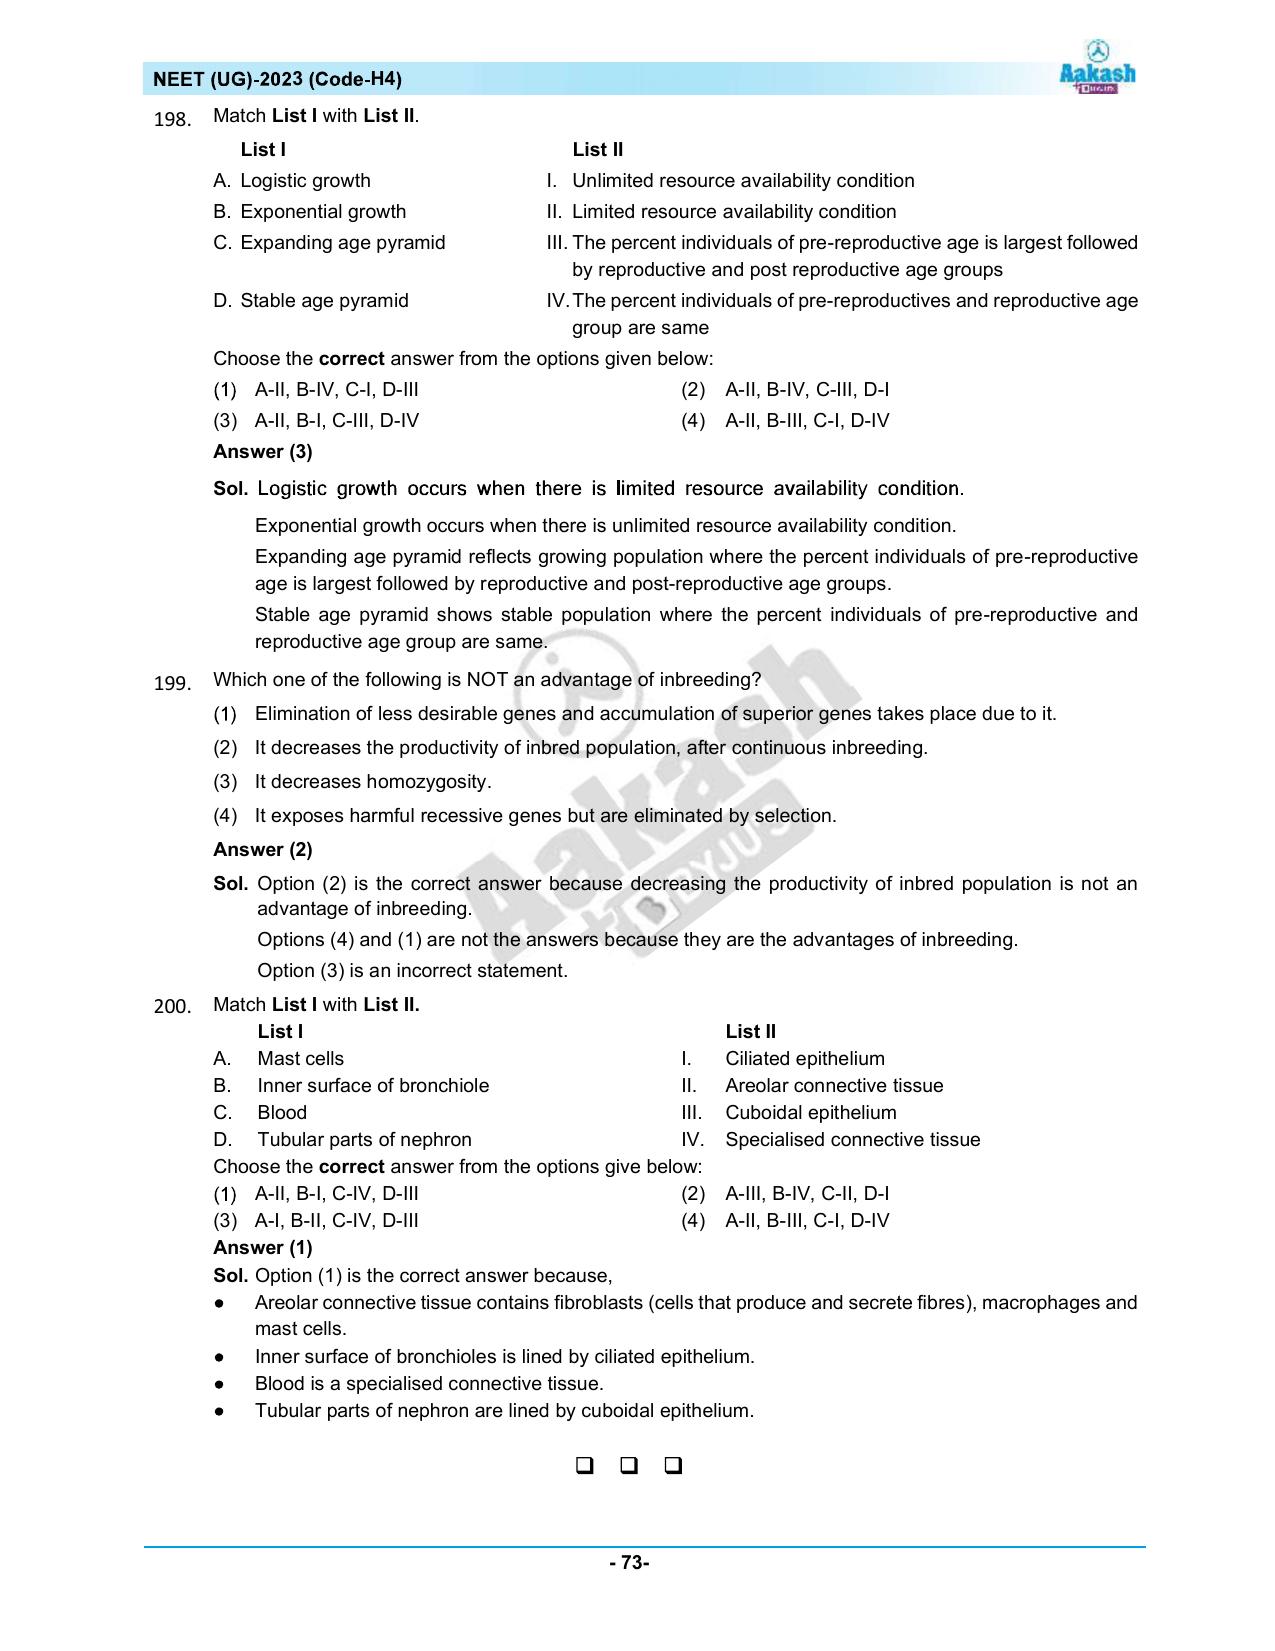 NEET 2023 Question Paper H4 - Page 73